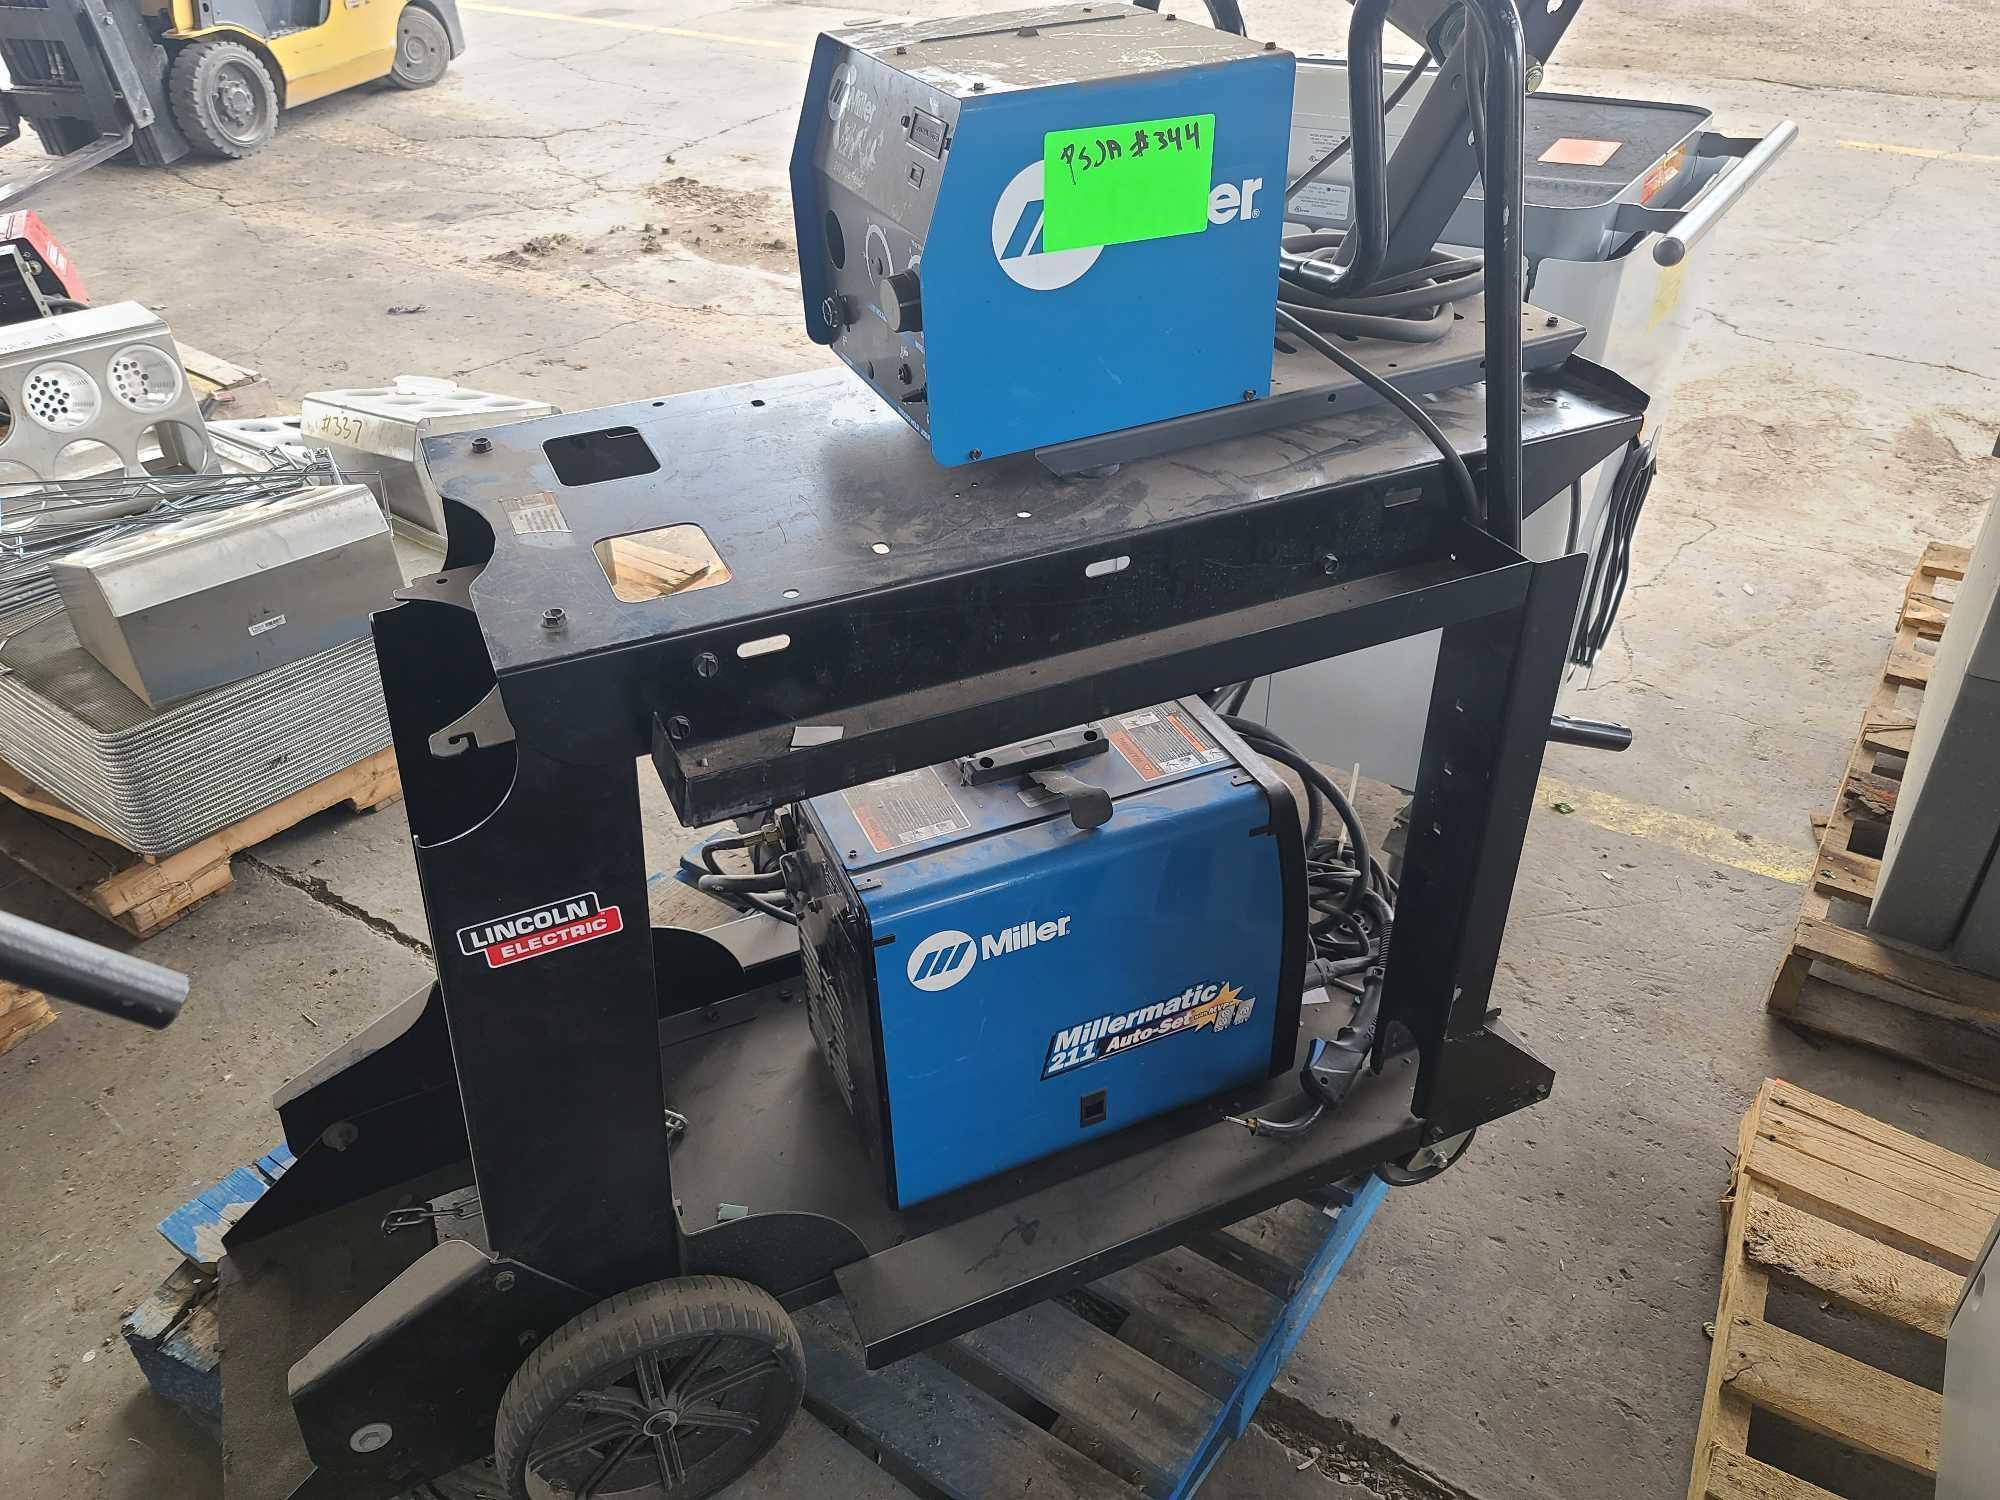 Millermatic 211 Auto-Set w/ MVP Wire Welder, Miller 22A 24V Wire Feeder, Lincoln Electric Cart